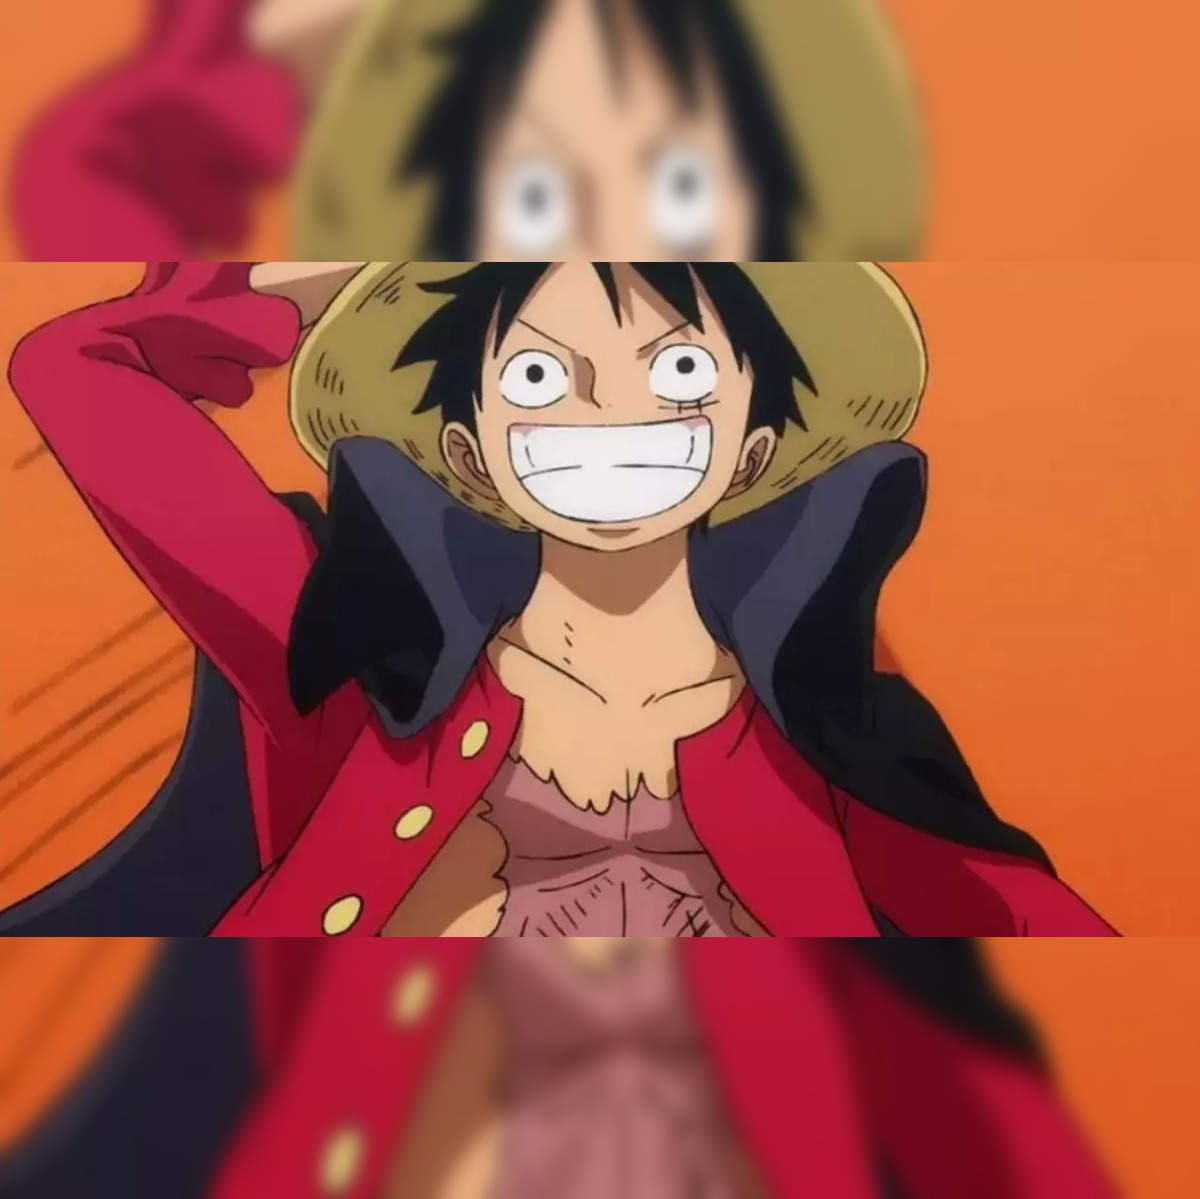 Using Crunchyroll in USA, where are the latest One Piece episodes? : r/ OnePiece